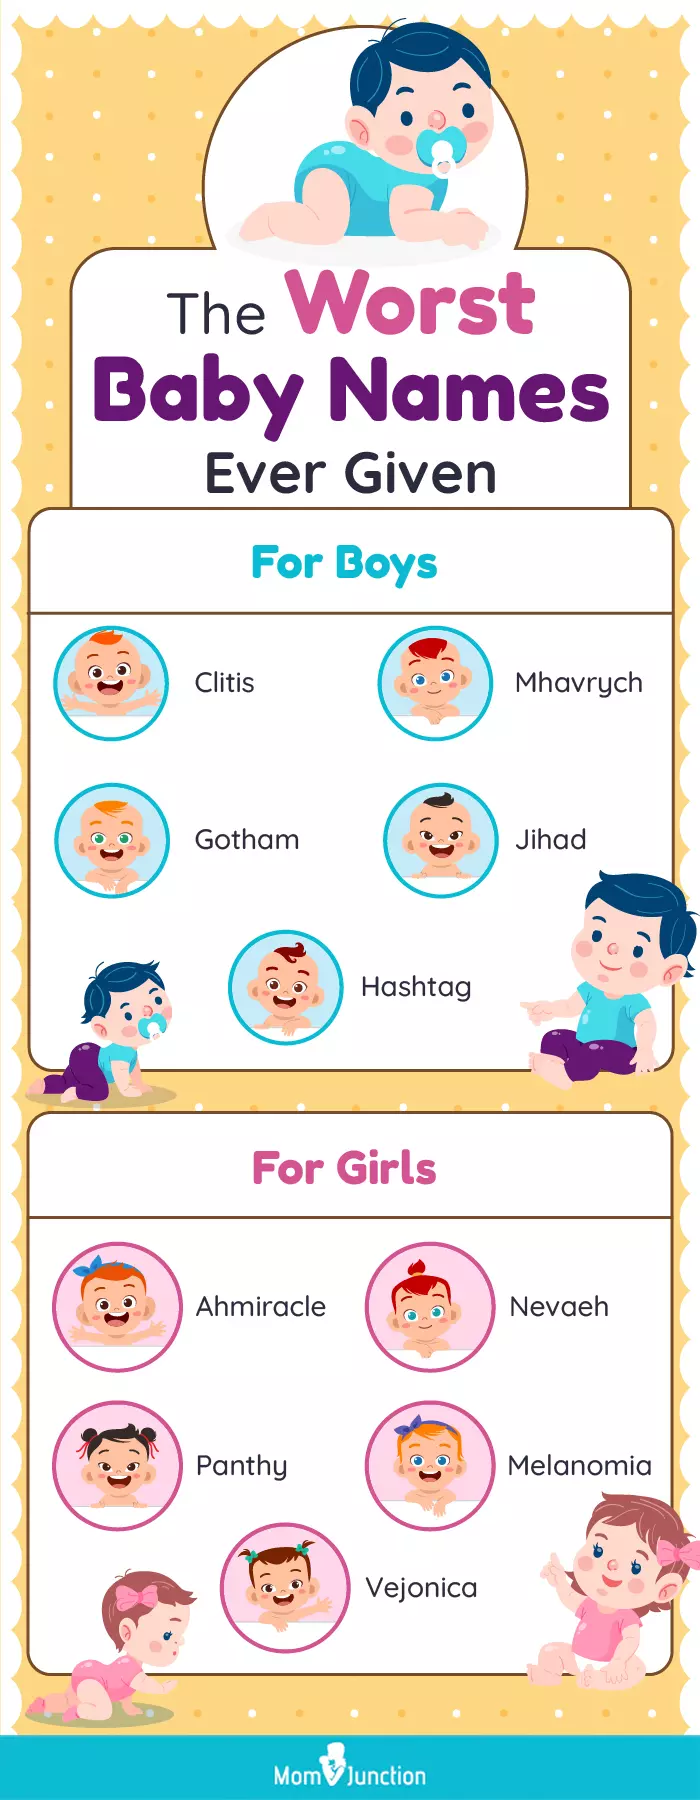 the worst baby names ever given (infographic)